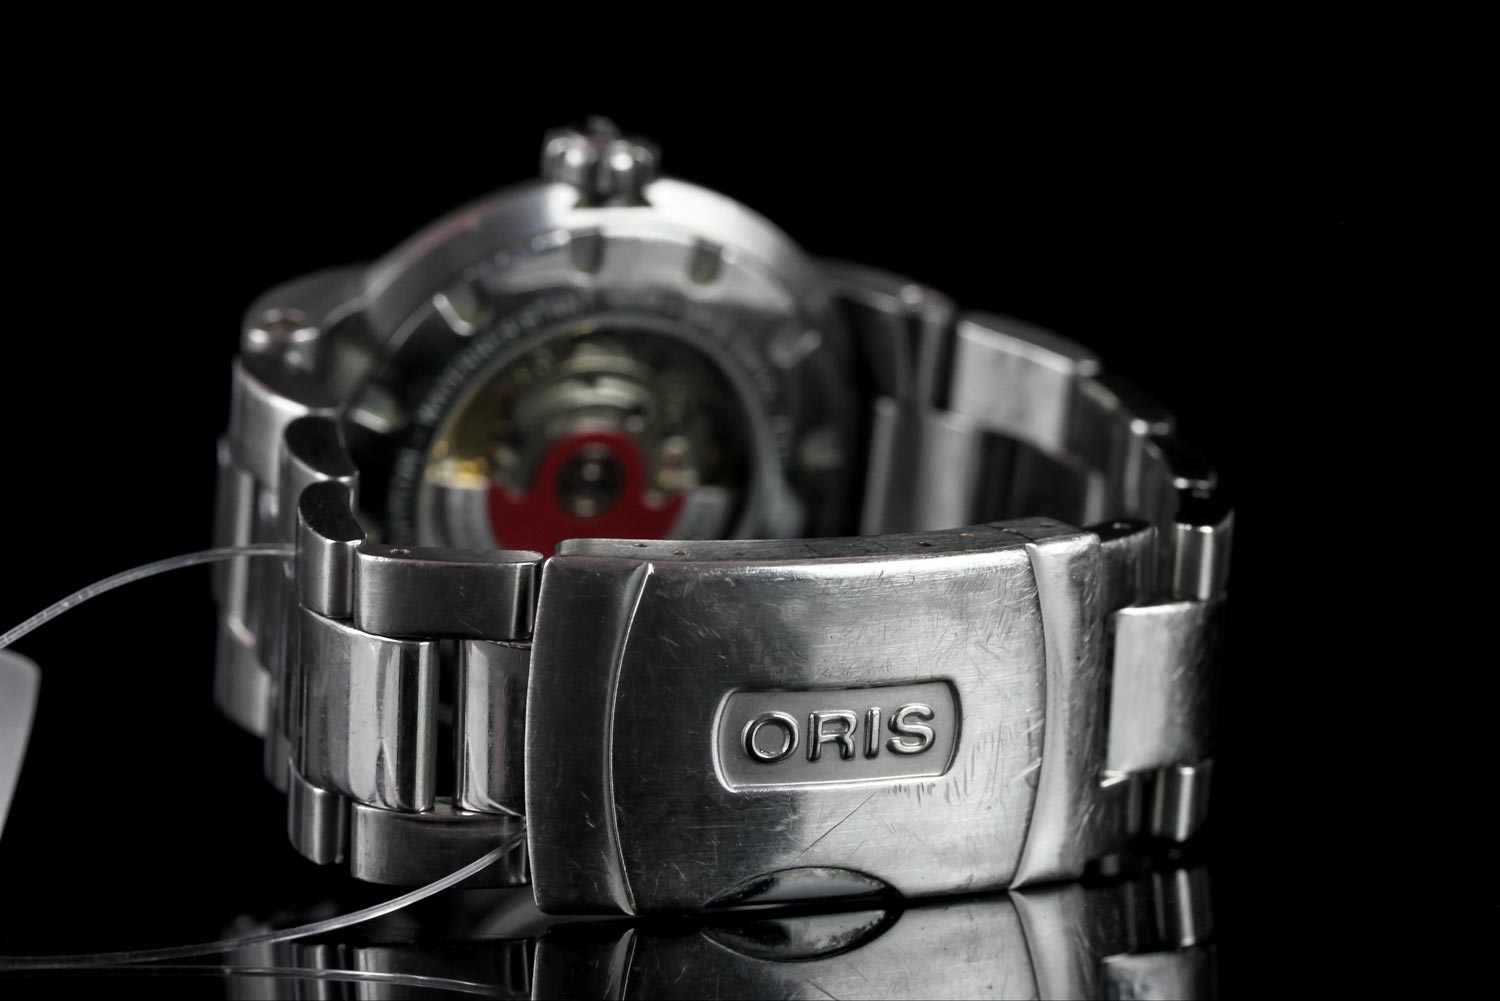 GENTLEMEN'S ORIS AUTOMATIC WRISTWATCH REF 7517-41, circular black dial with arabic numbers and - Image 2 of 3